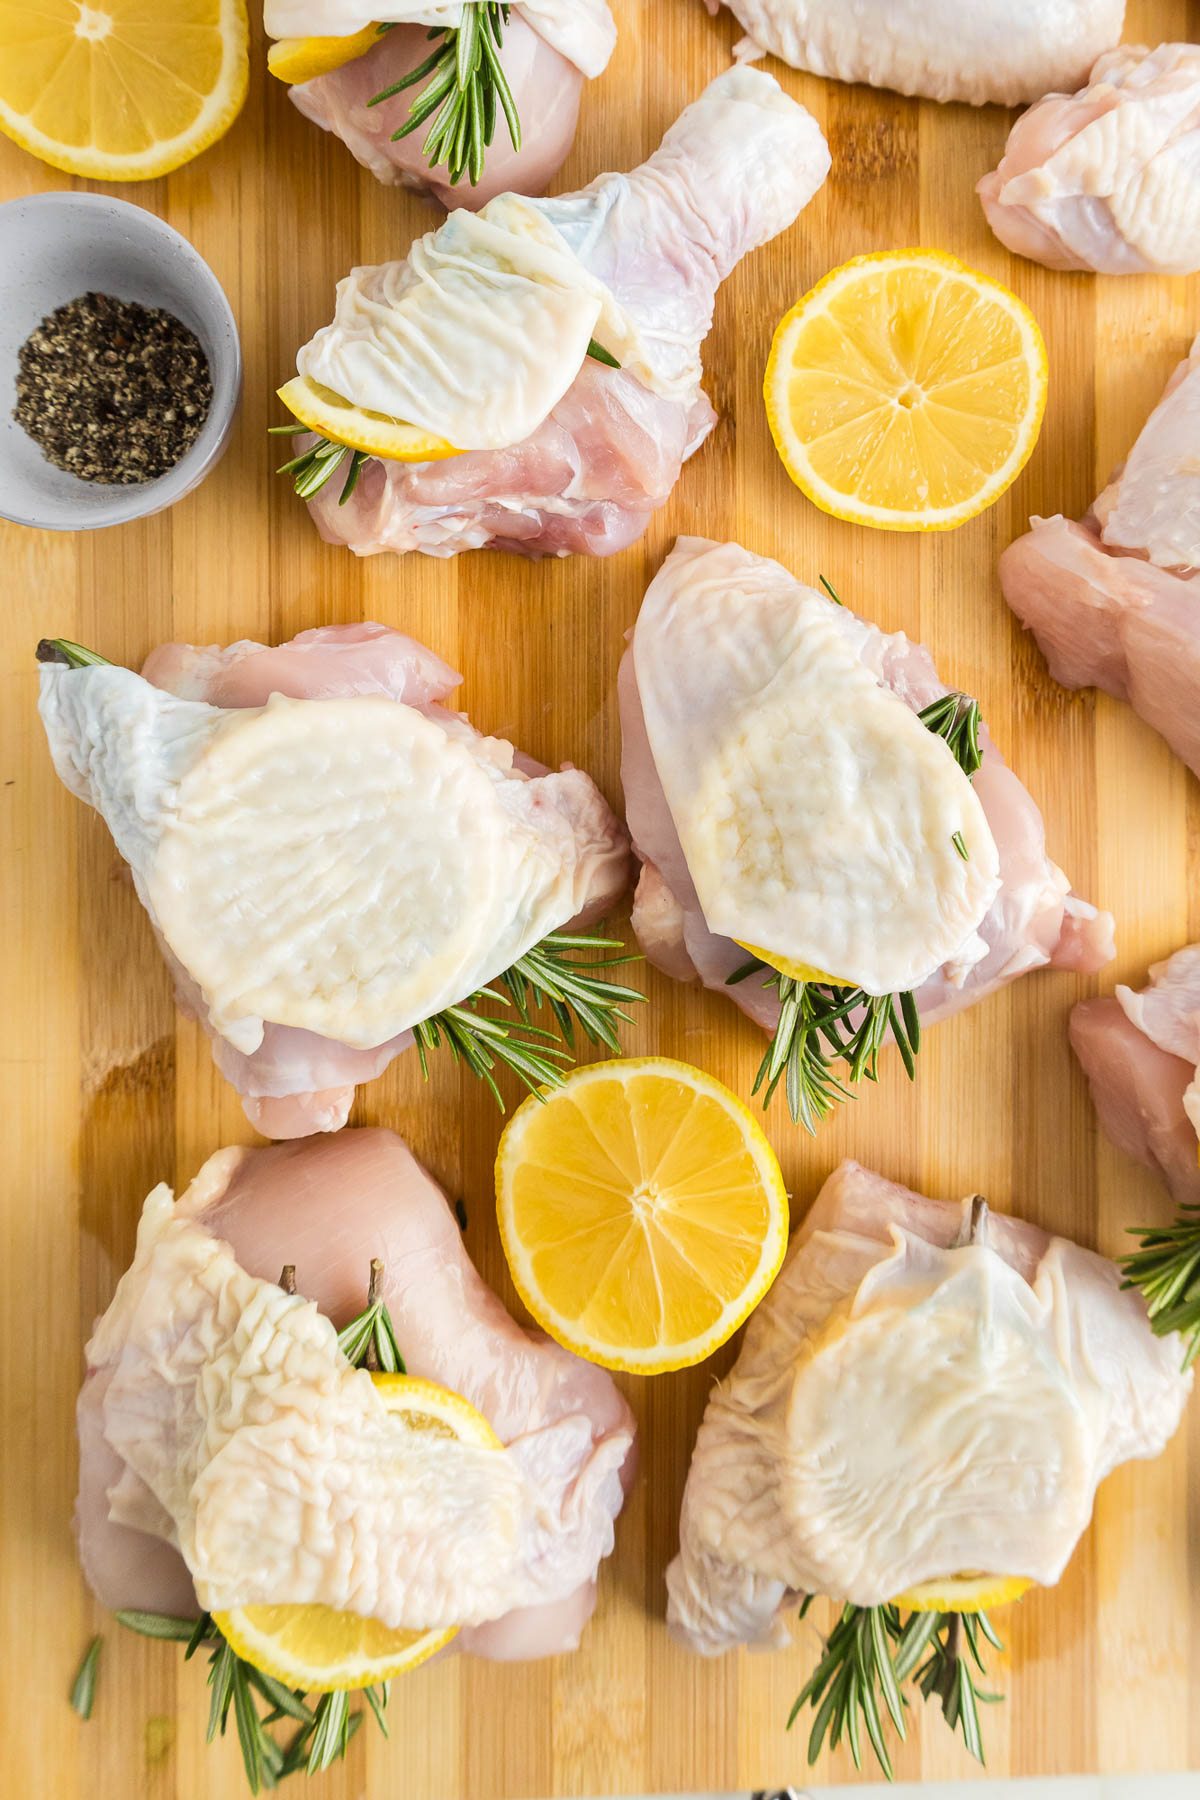 Chicken with rosemary and lemon slices on a cutting board.